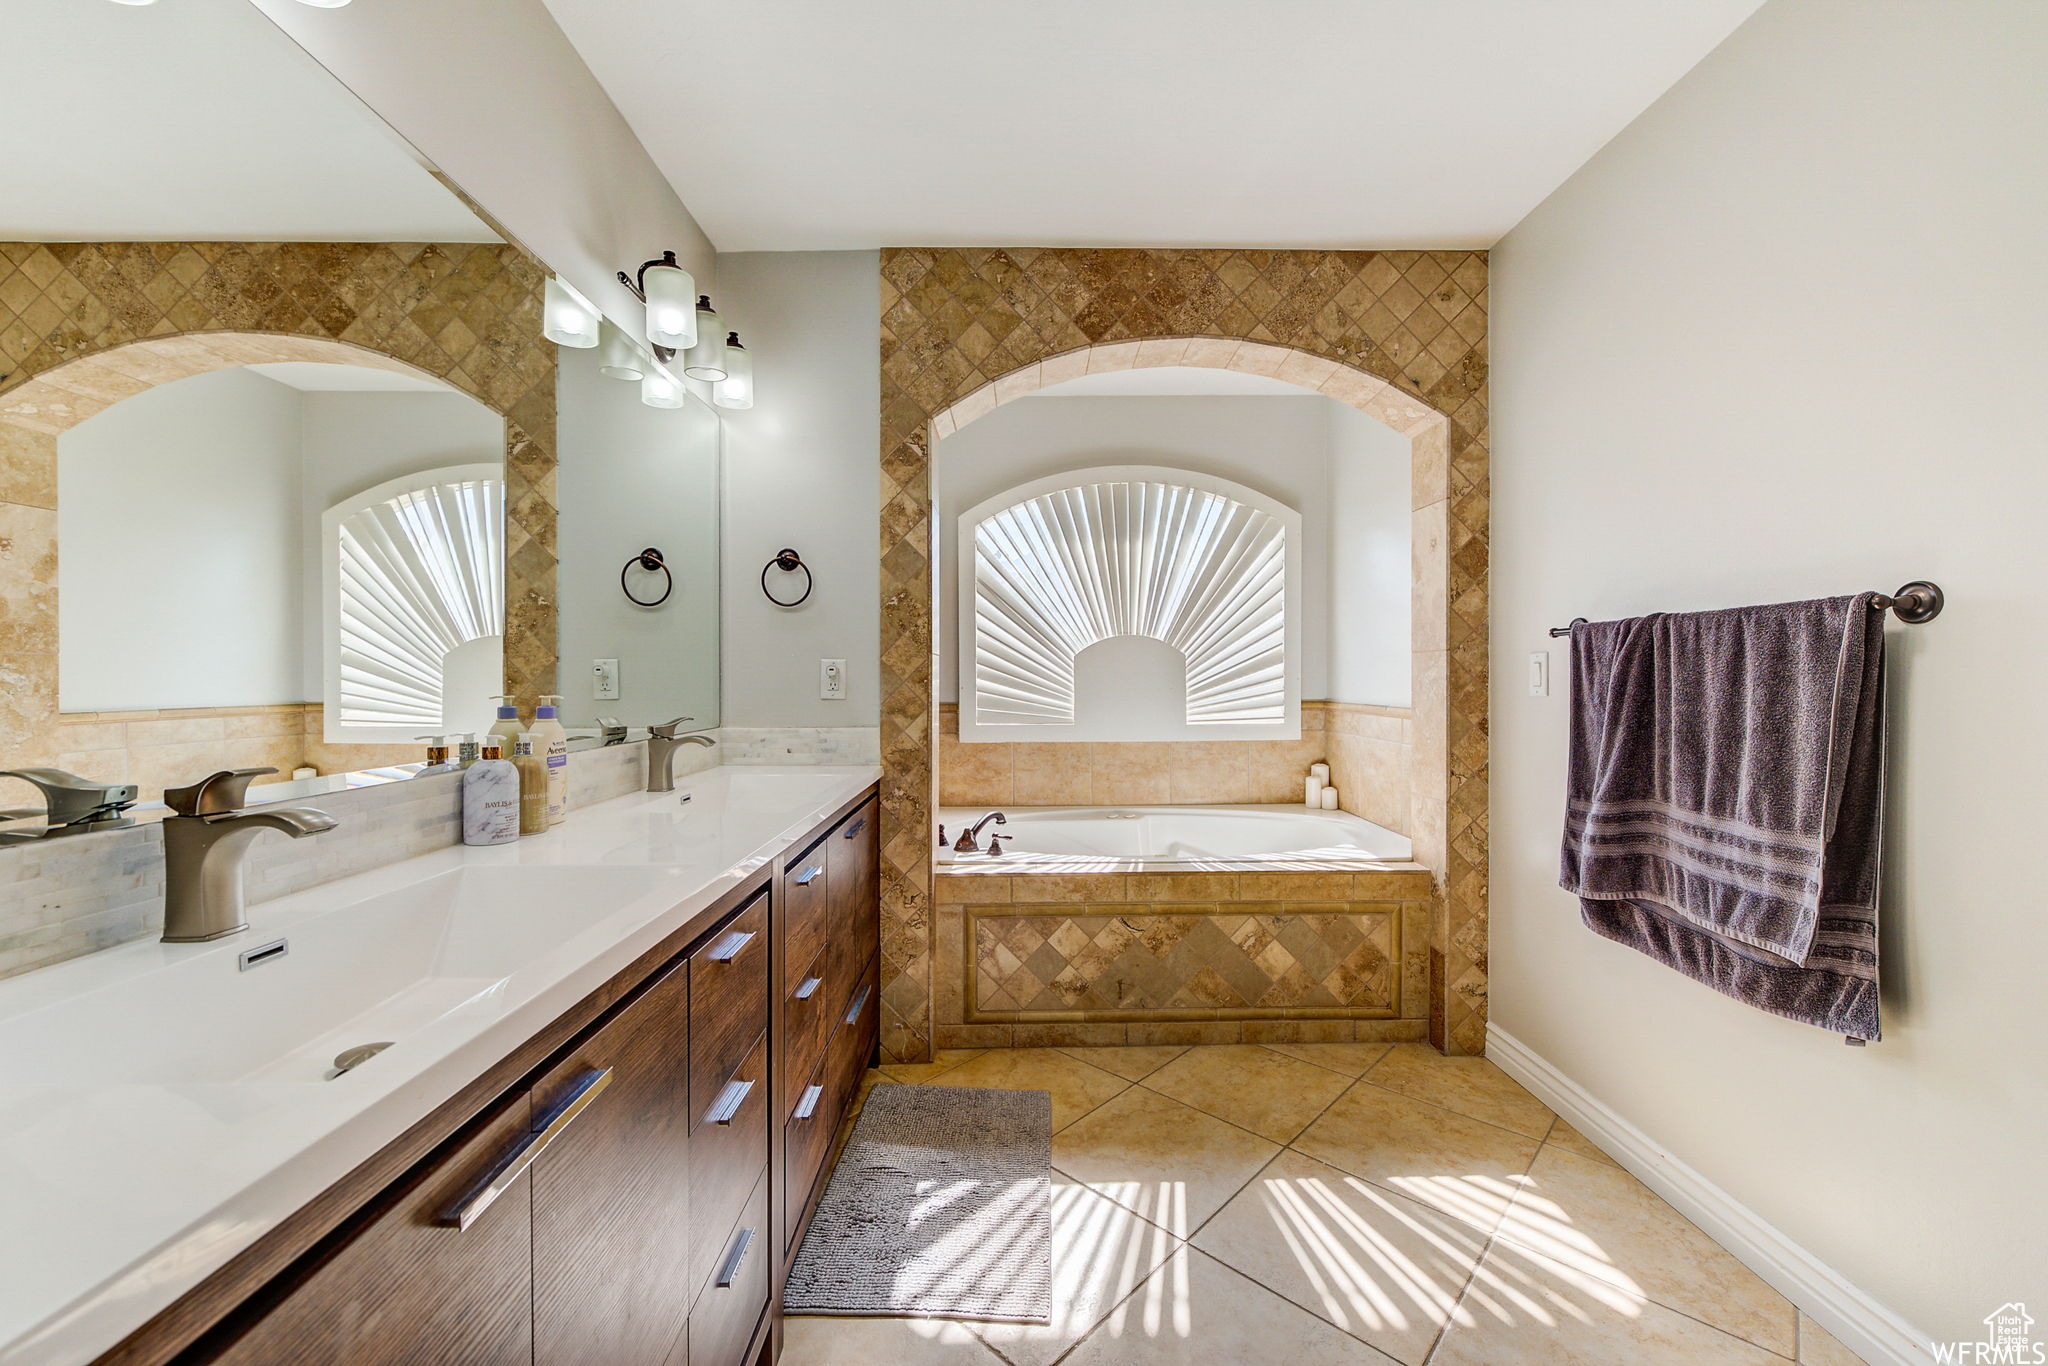 Bathroom with dual bowl vanity, tile floors, and a relaxing tiled bath